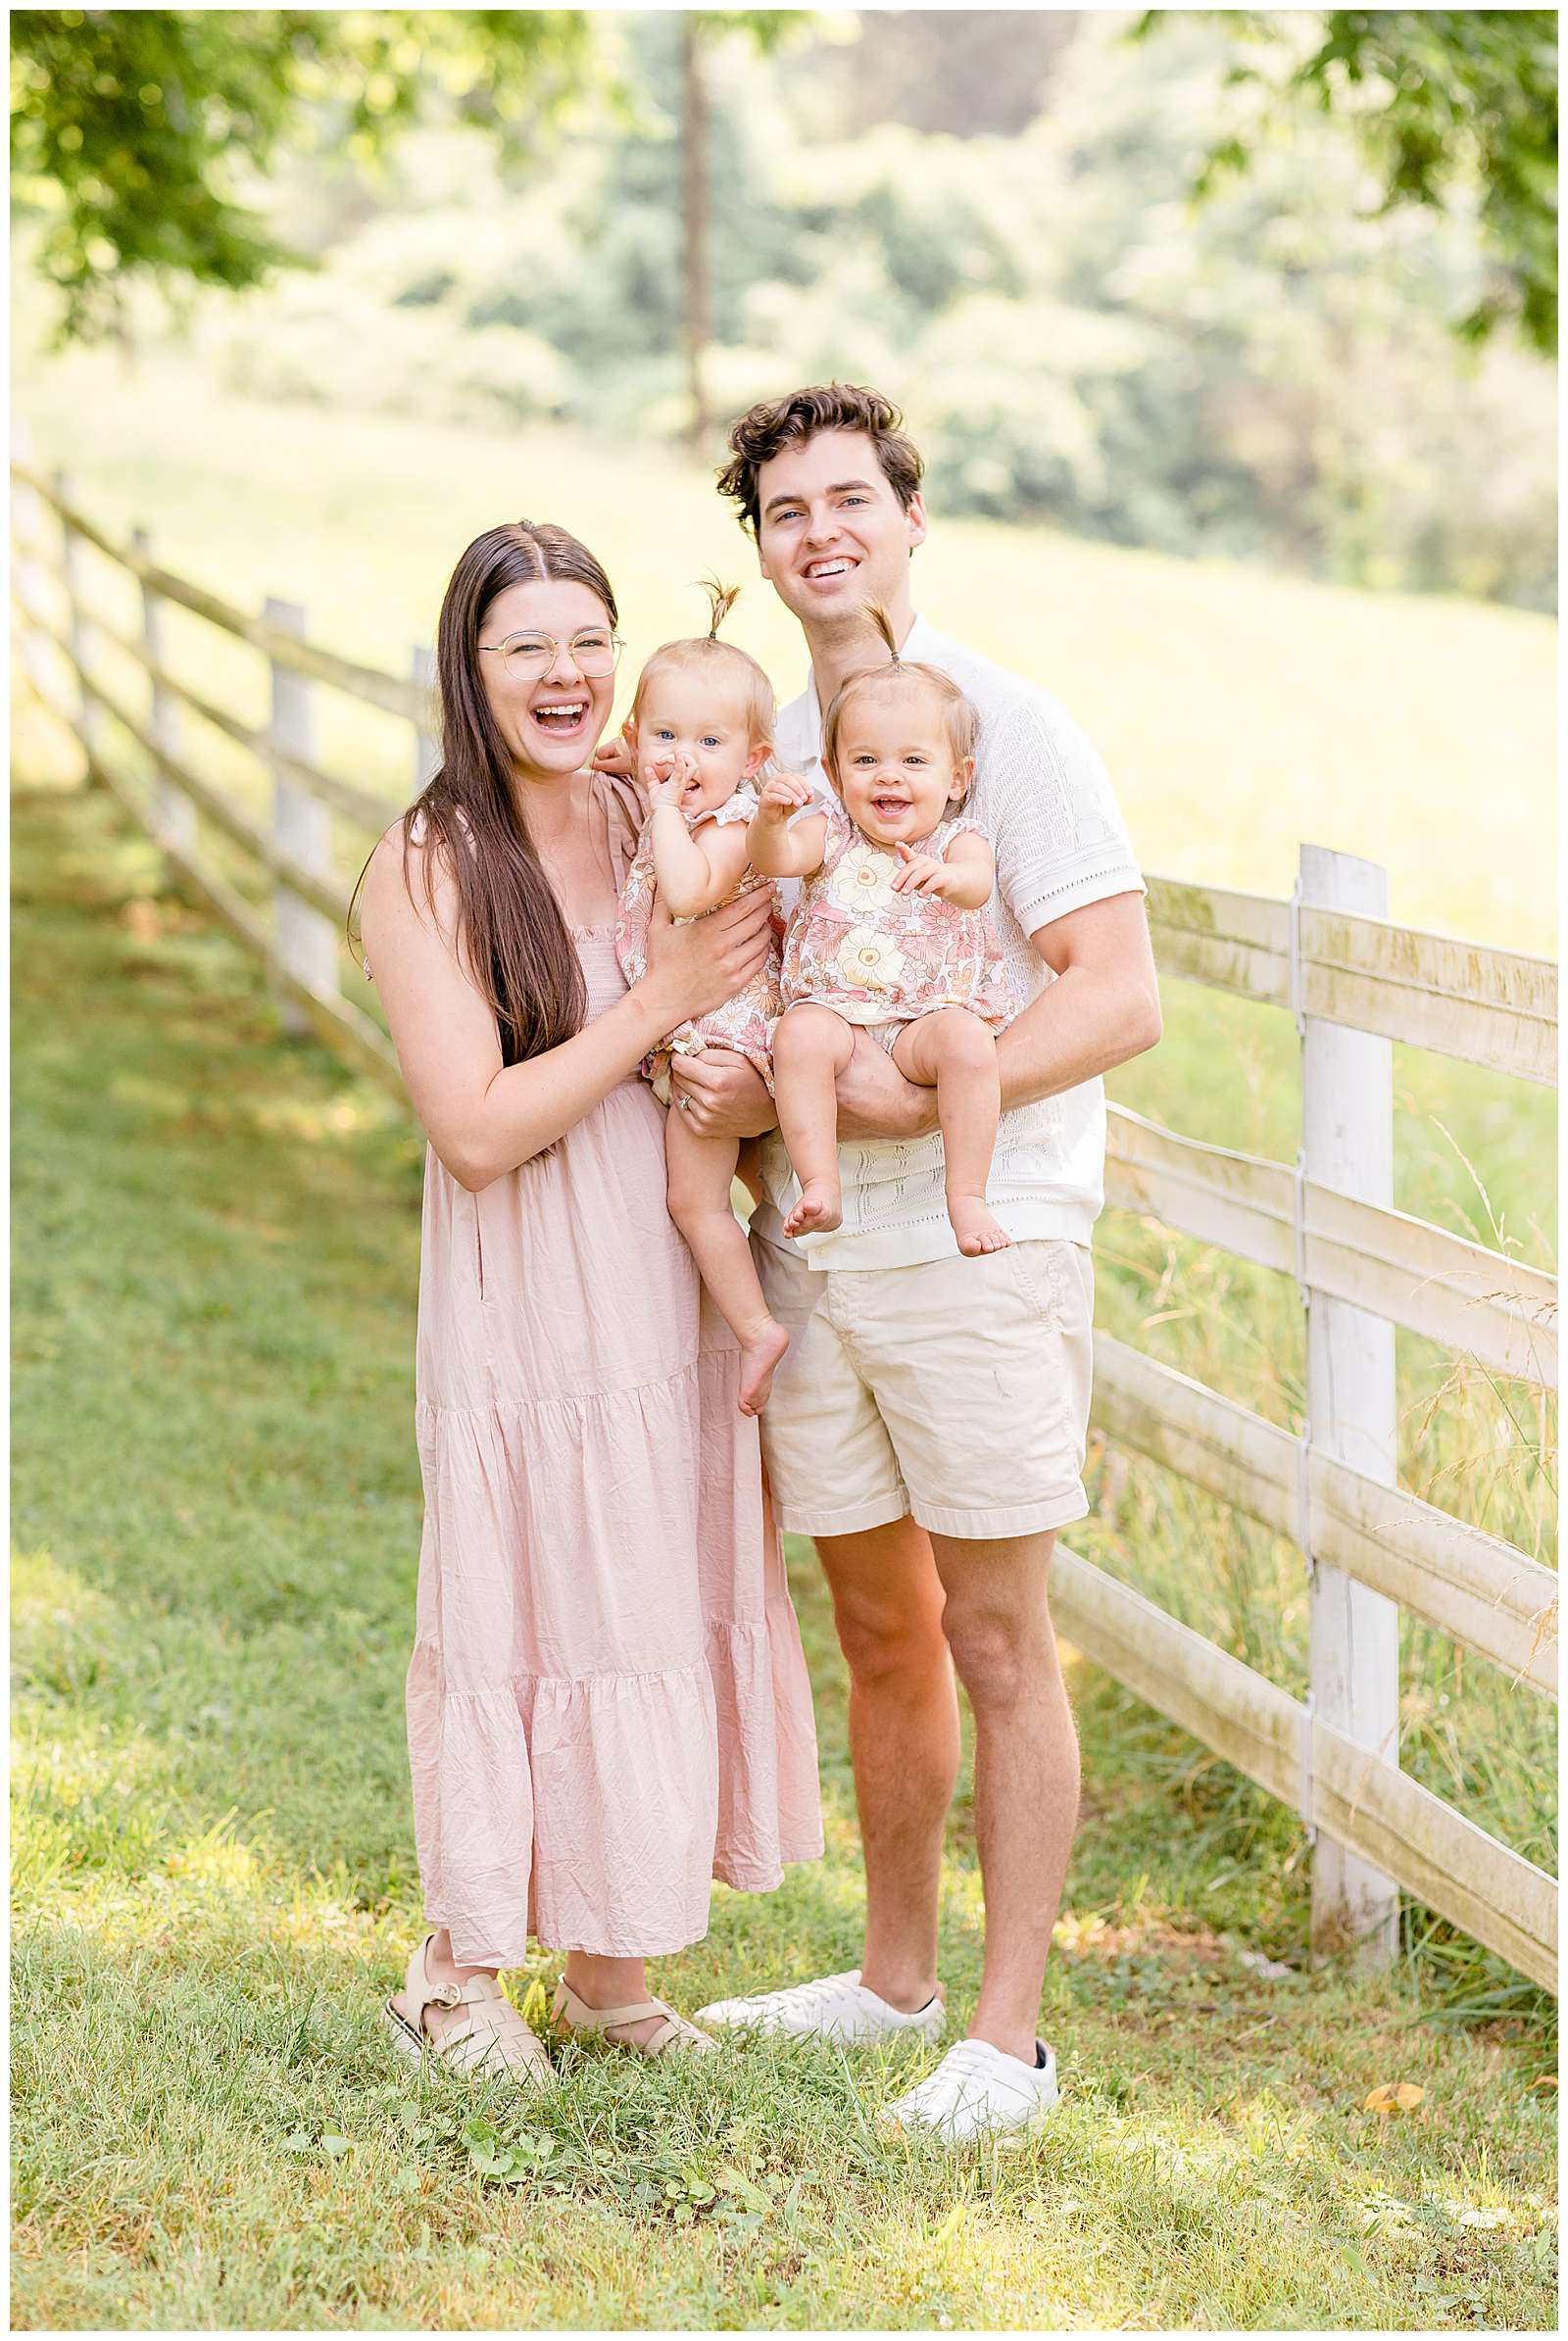 Nashville family portraits of a family with 1 year old TWINS is on the blog TODAY! Click the link to see this session and join my Behind the Lens membership! -rebeccaricephoto.com